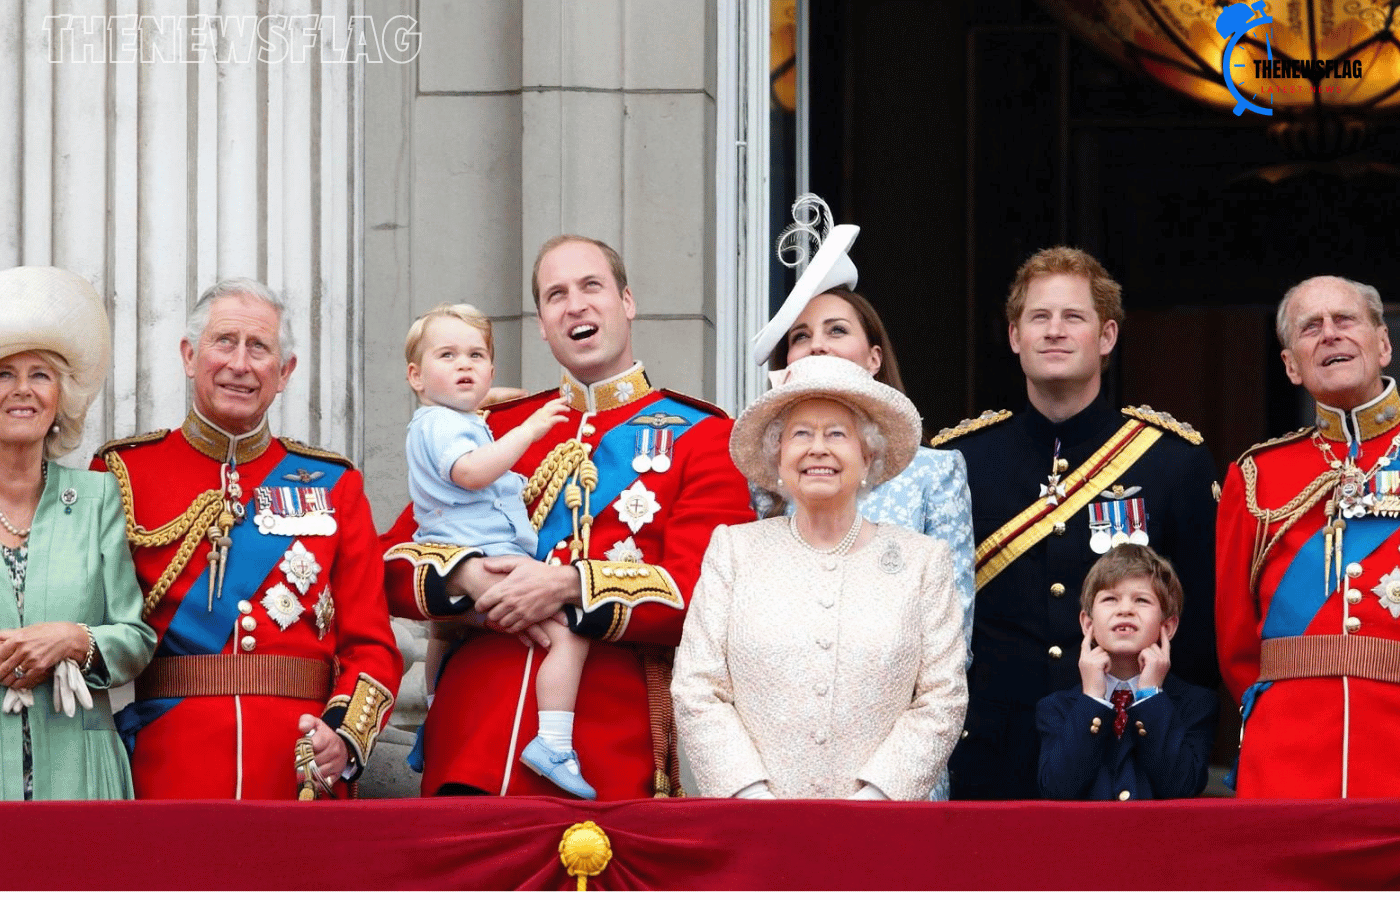 Conspiracy theories regarding the British Royal Family are rife on social media.